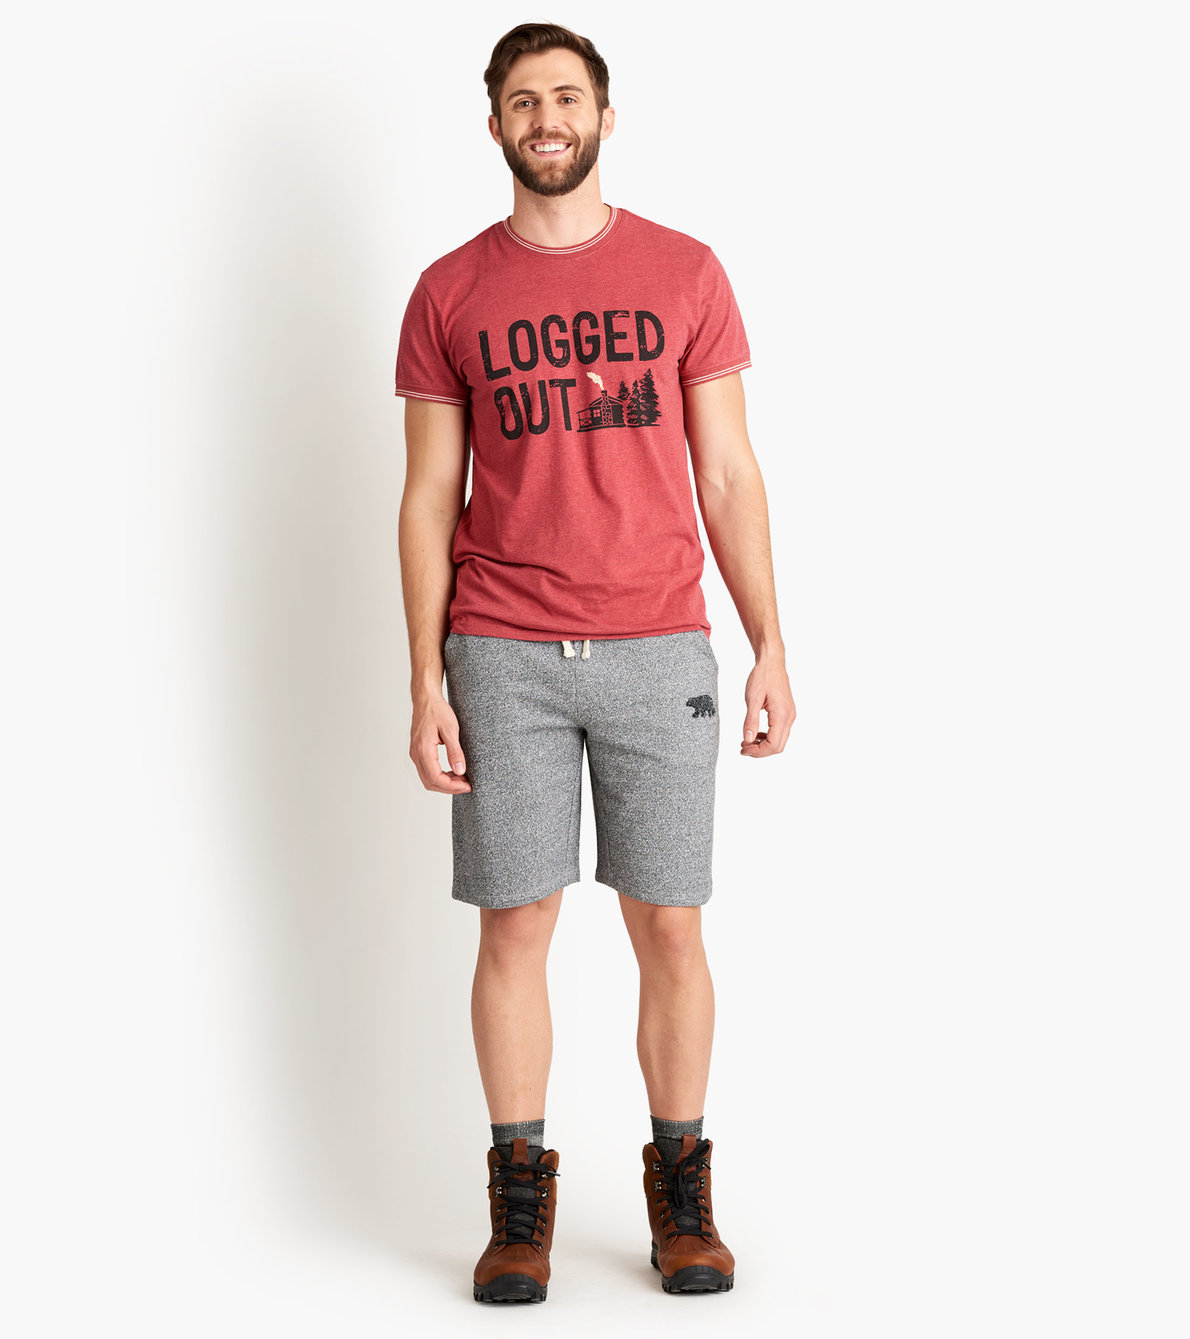 View larger image of Logged Out Men's Heritage Tee